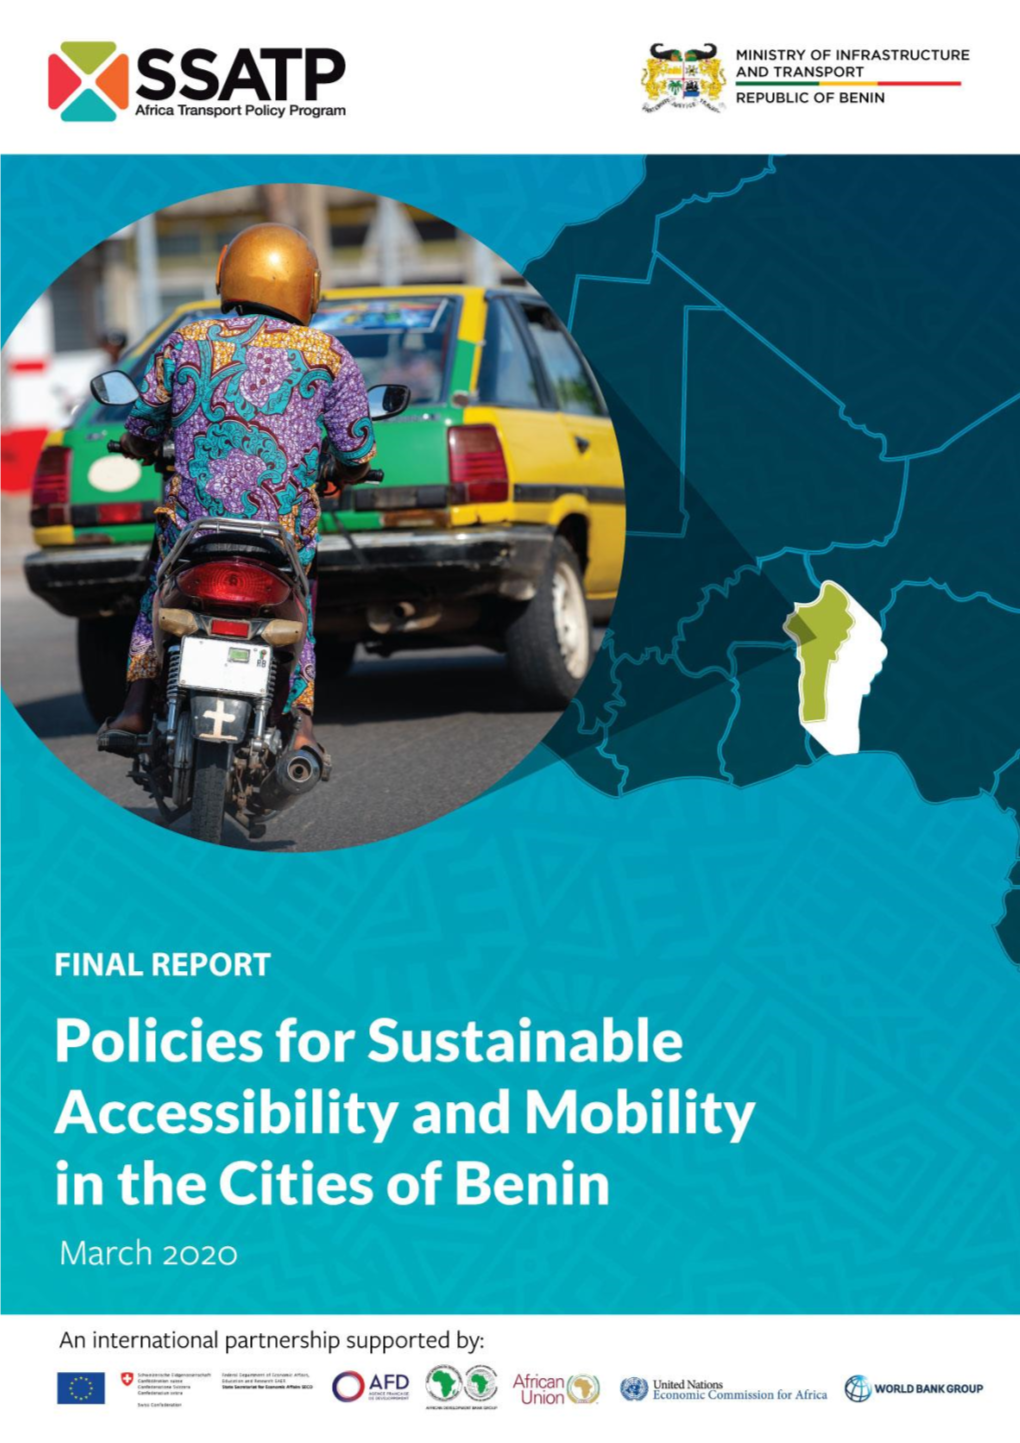 Policies for Sustainable Accessibility and Mobility in the Cities of Benin